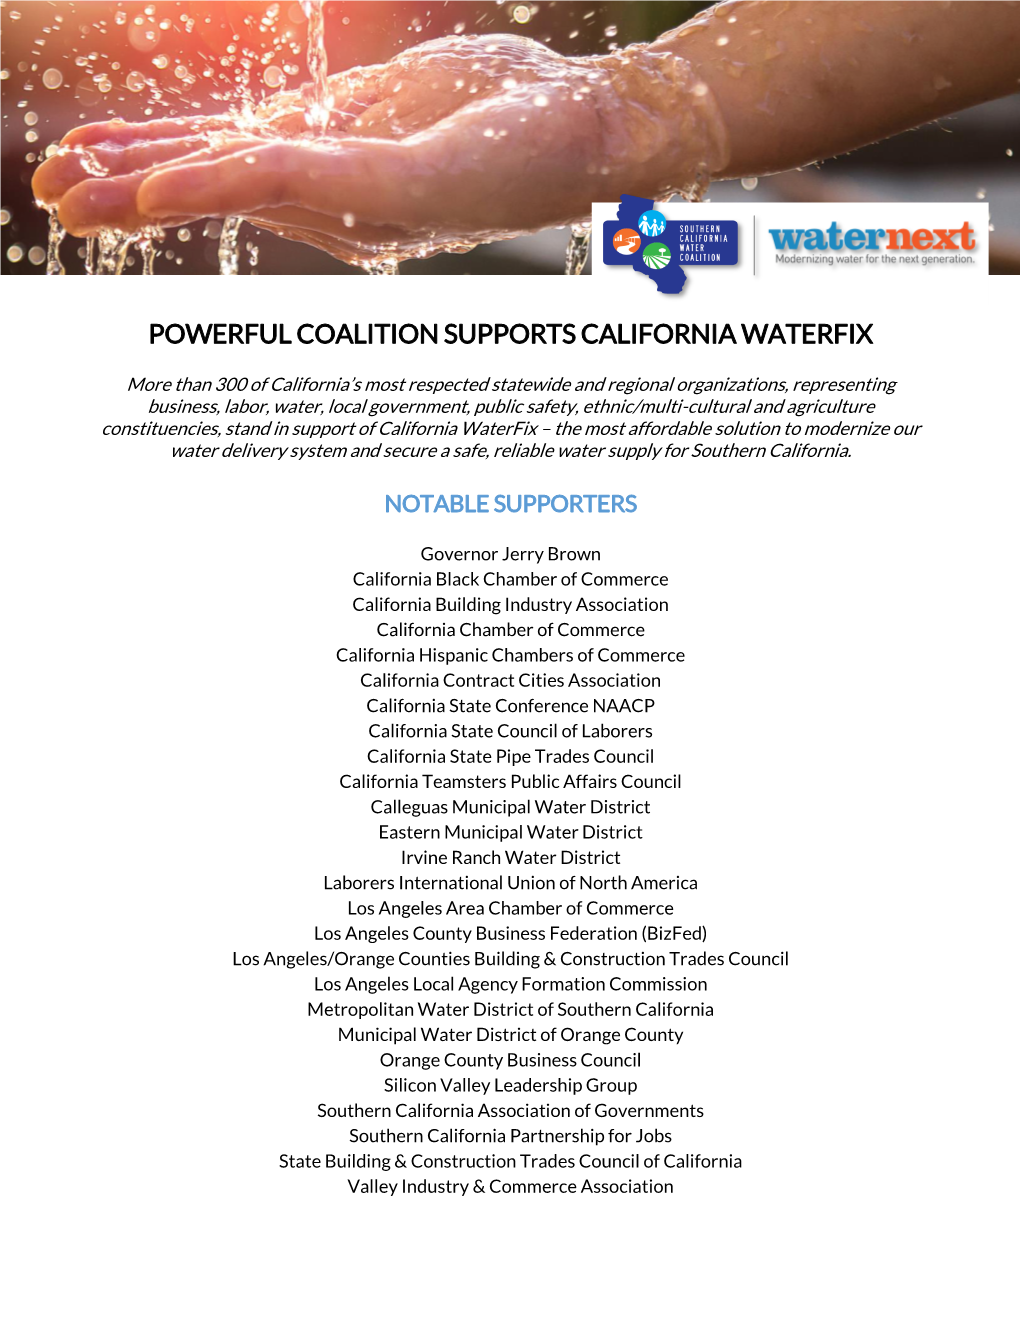 Powerful Coalition Supports California Waterfix